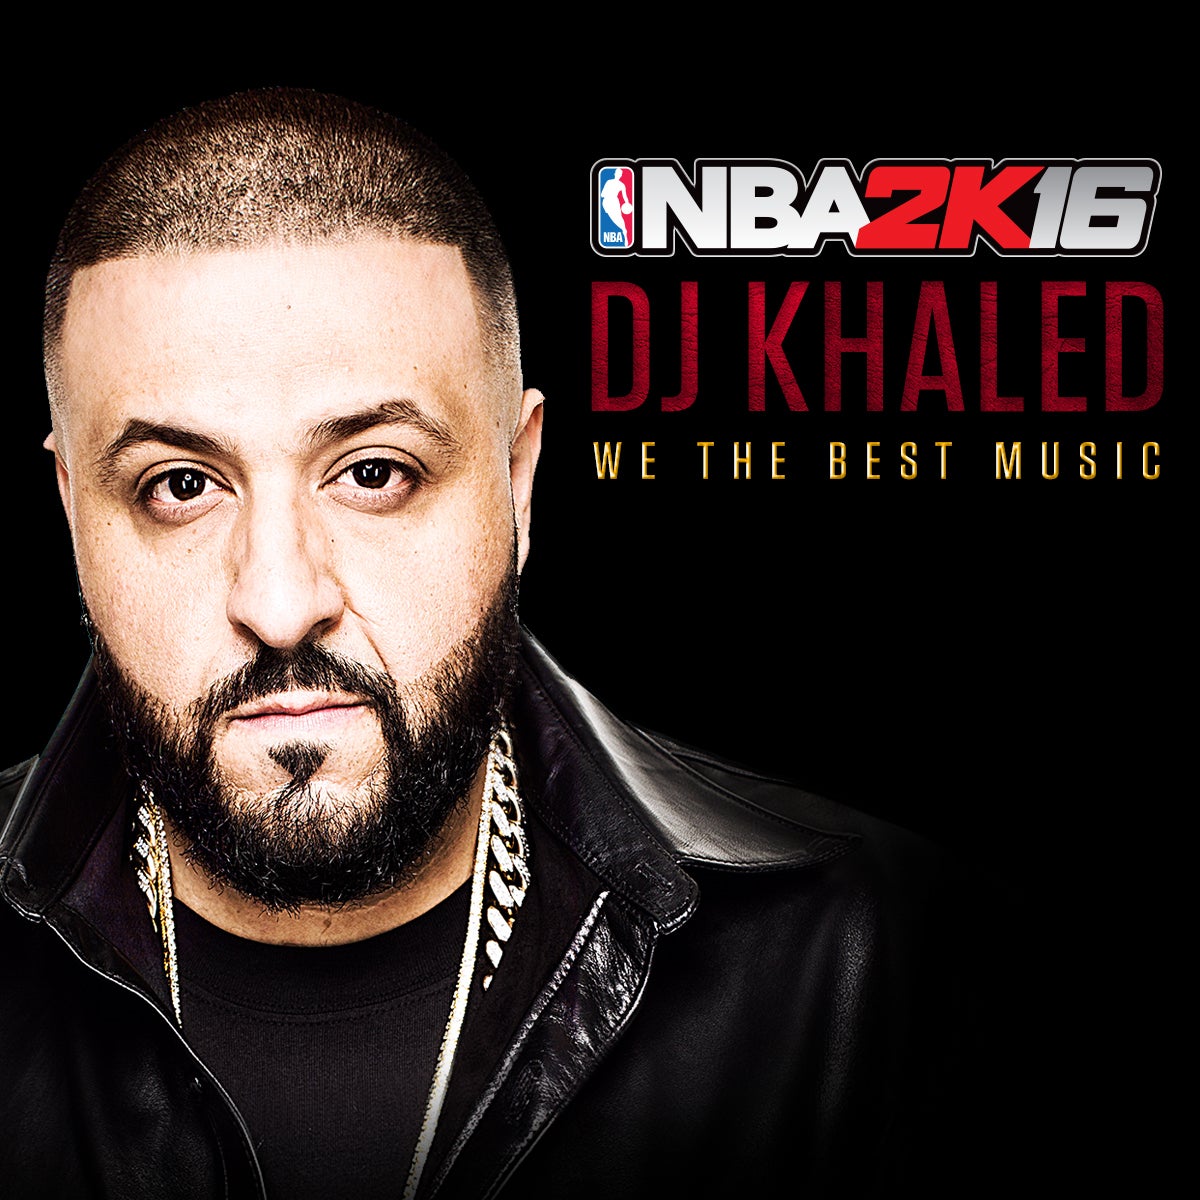 Image for Get your groove on with the official NBA 2K16 soundtrack